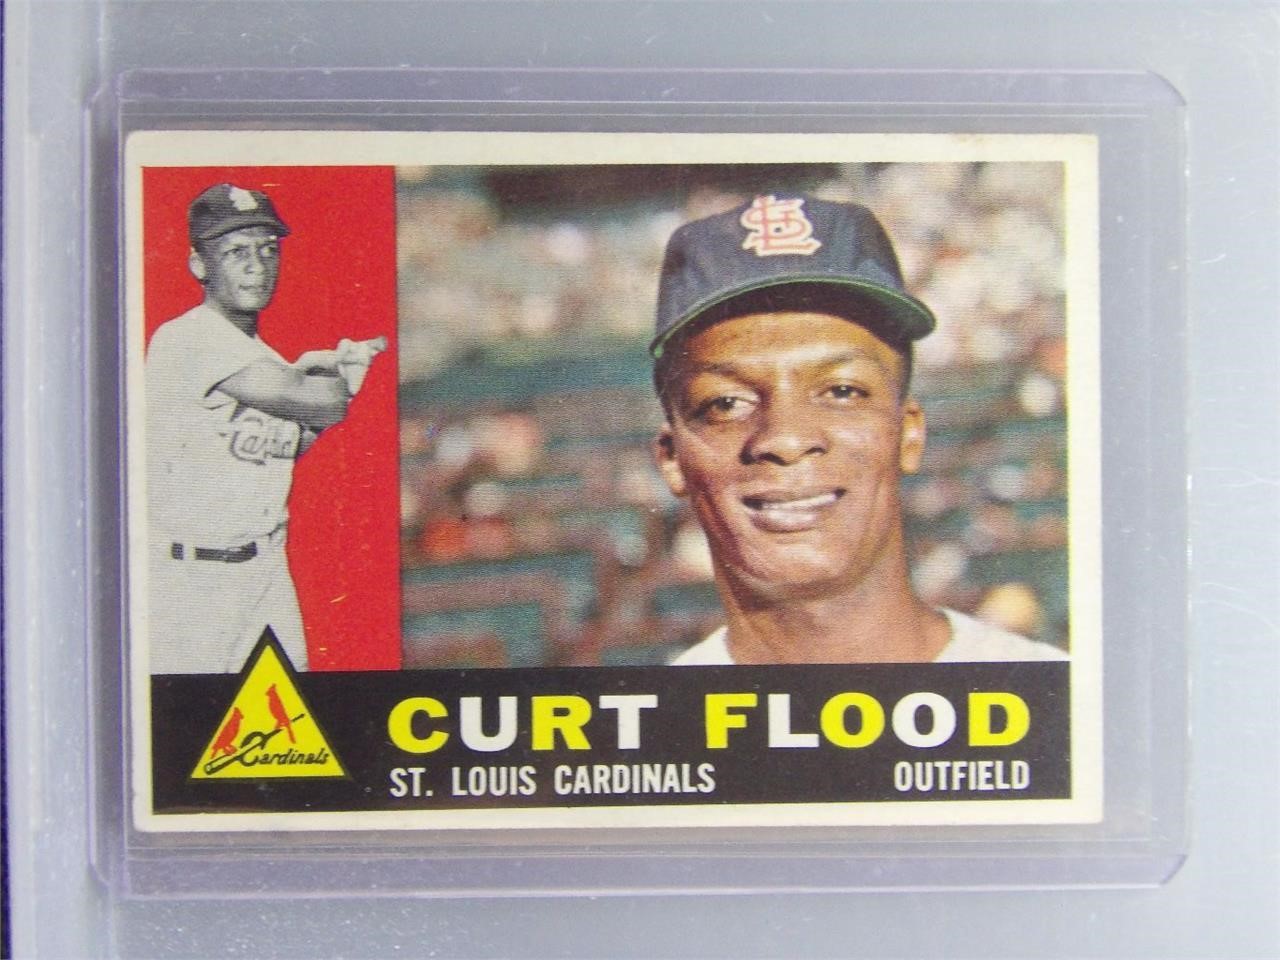 Great Vintage Modern Sports Cards July 21st at 7:00 Central